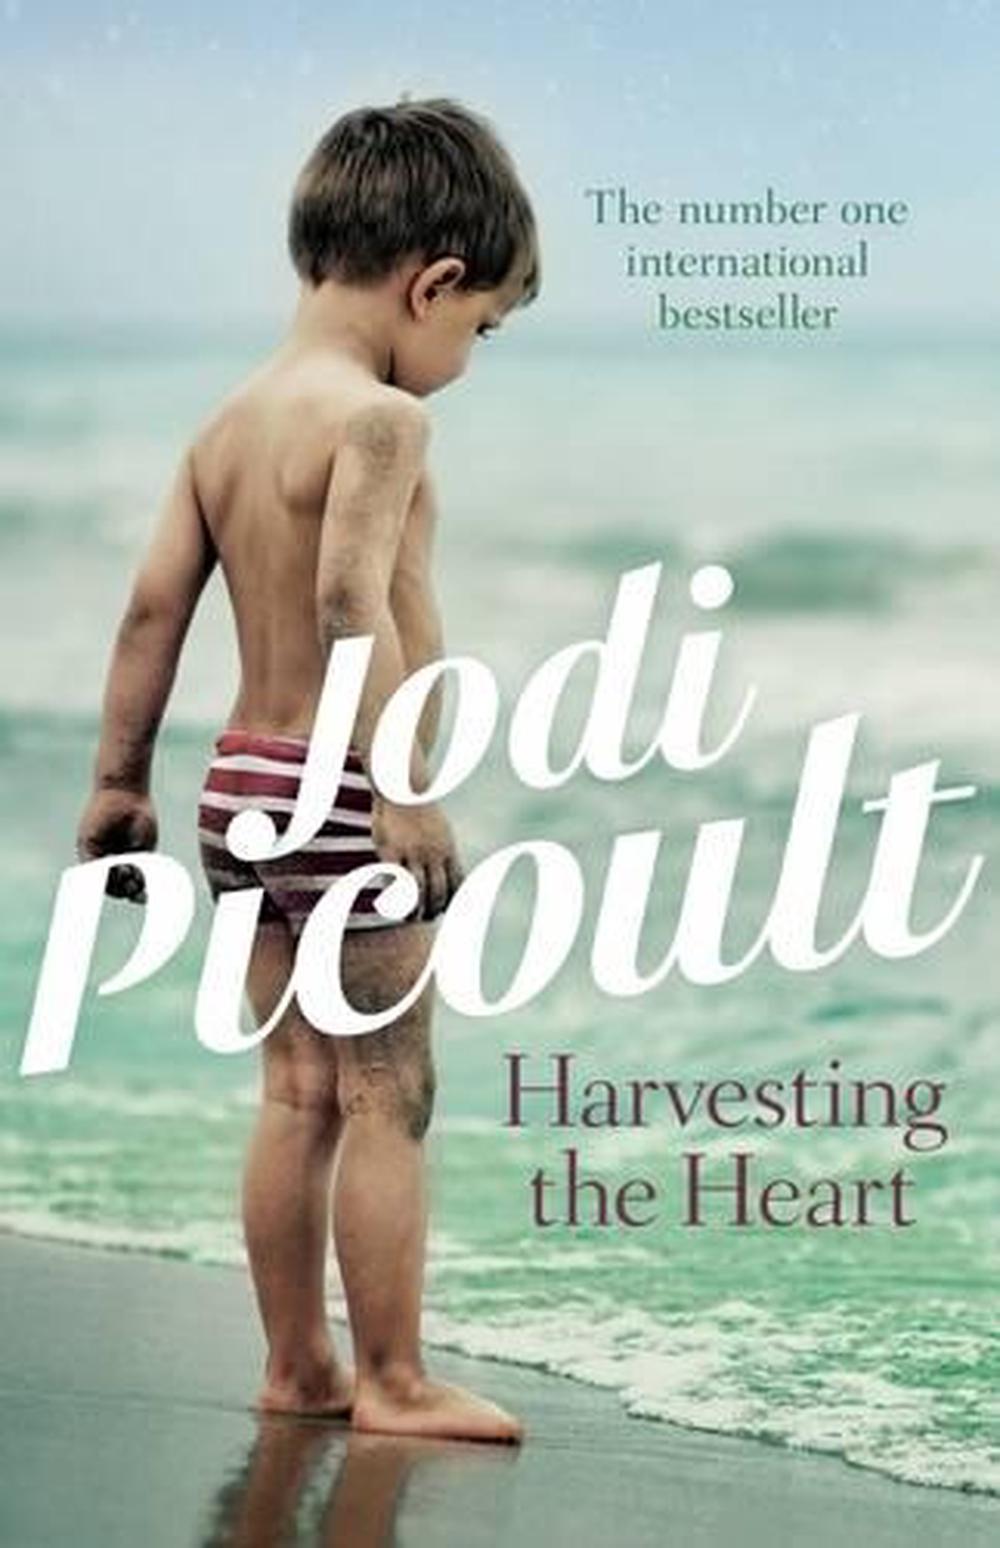 harvesting the heart book review